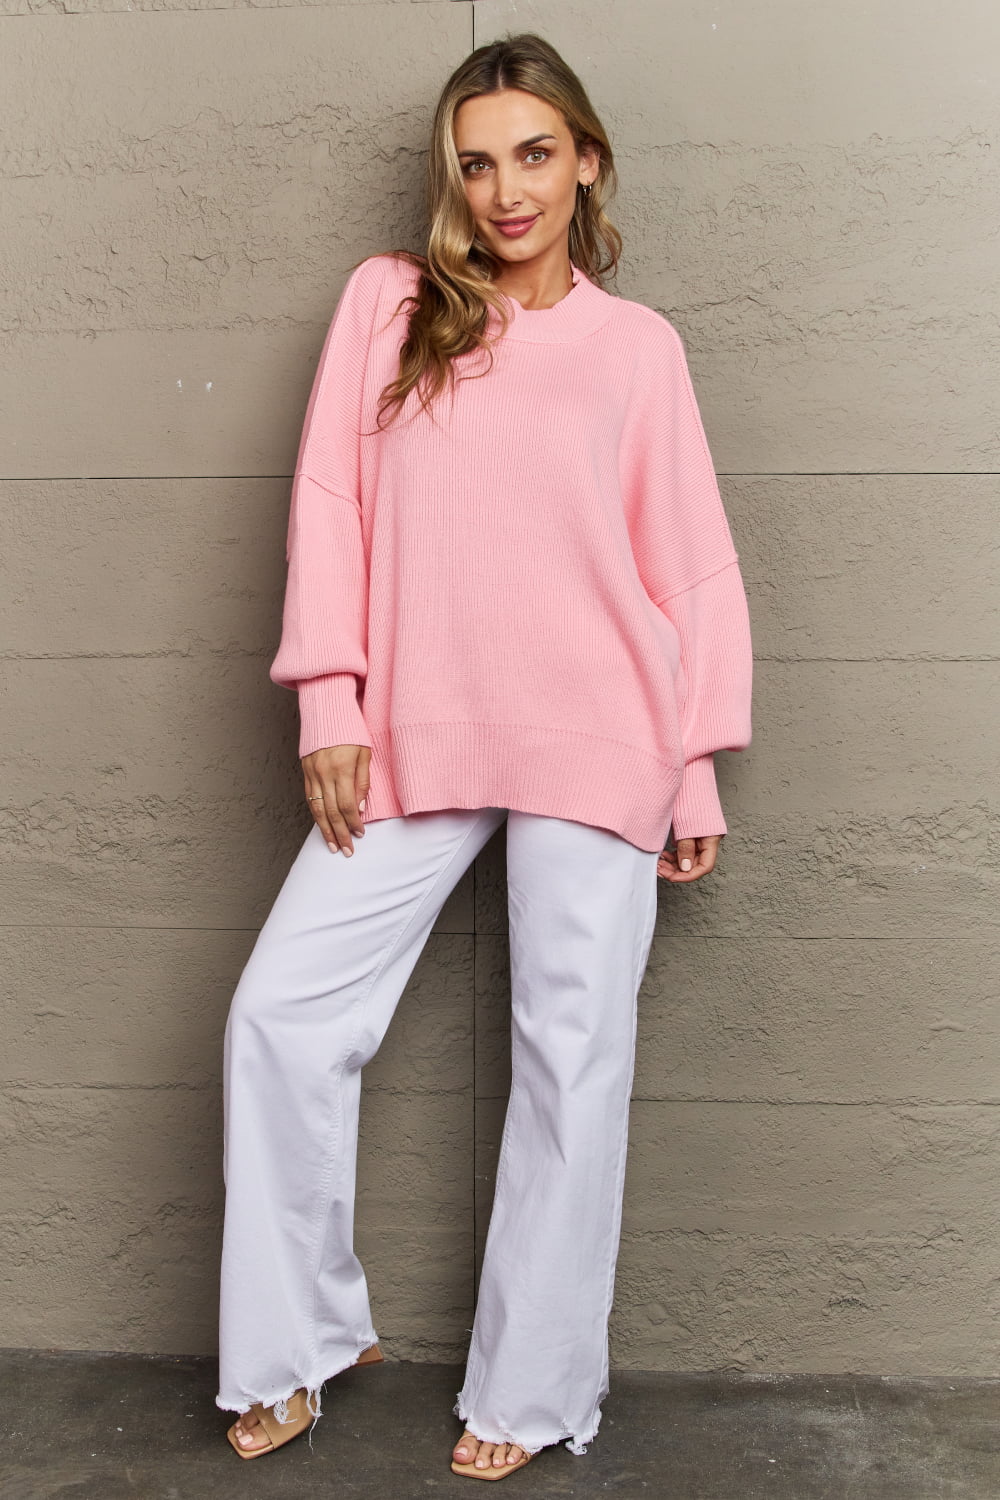 Zenana Comfort Awaits Slouchy Side Slit Sweater in Pink